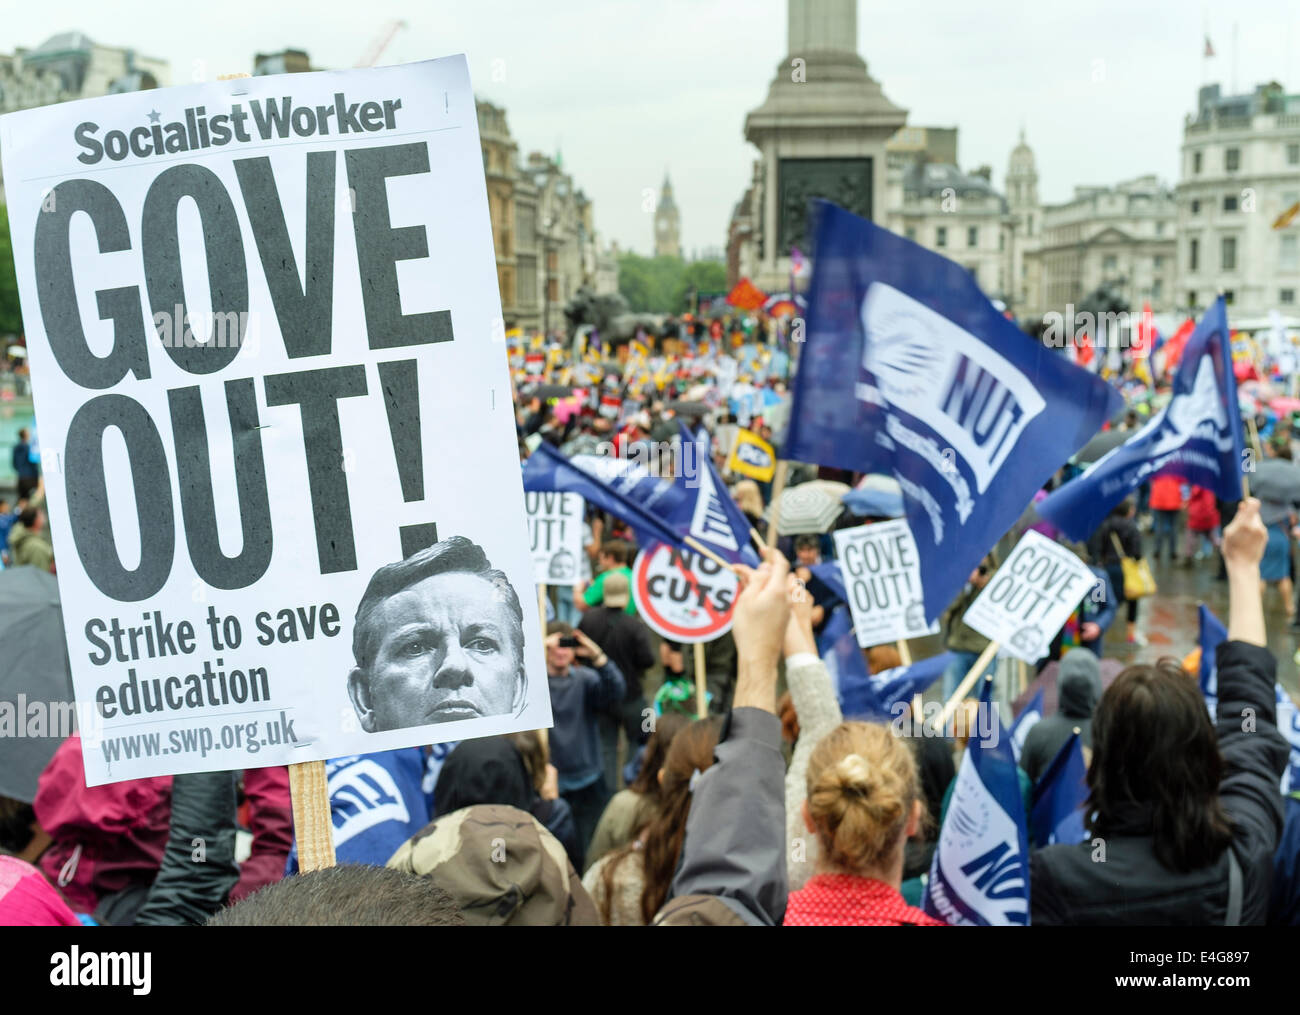 London, UK. 10th July, 2014. Public sector workers strike action. Pictured: Members of the National Union of Teachers join other public sector workers at a rally in Trafalgar Square. Stock Photo